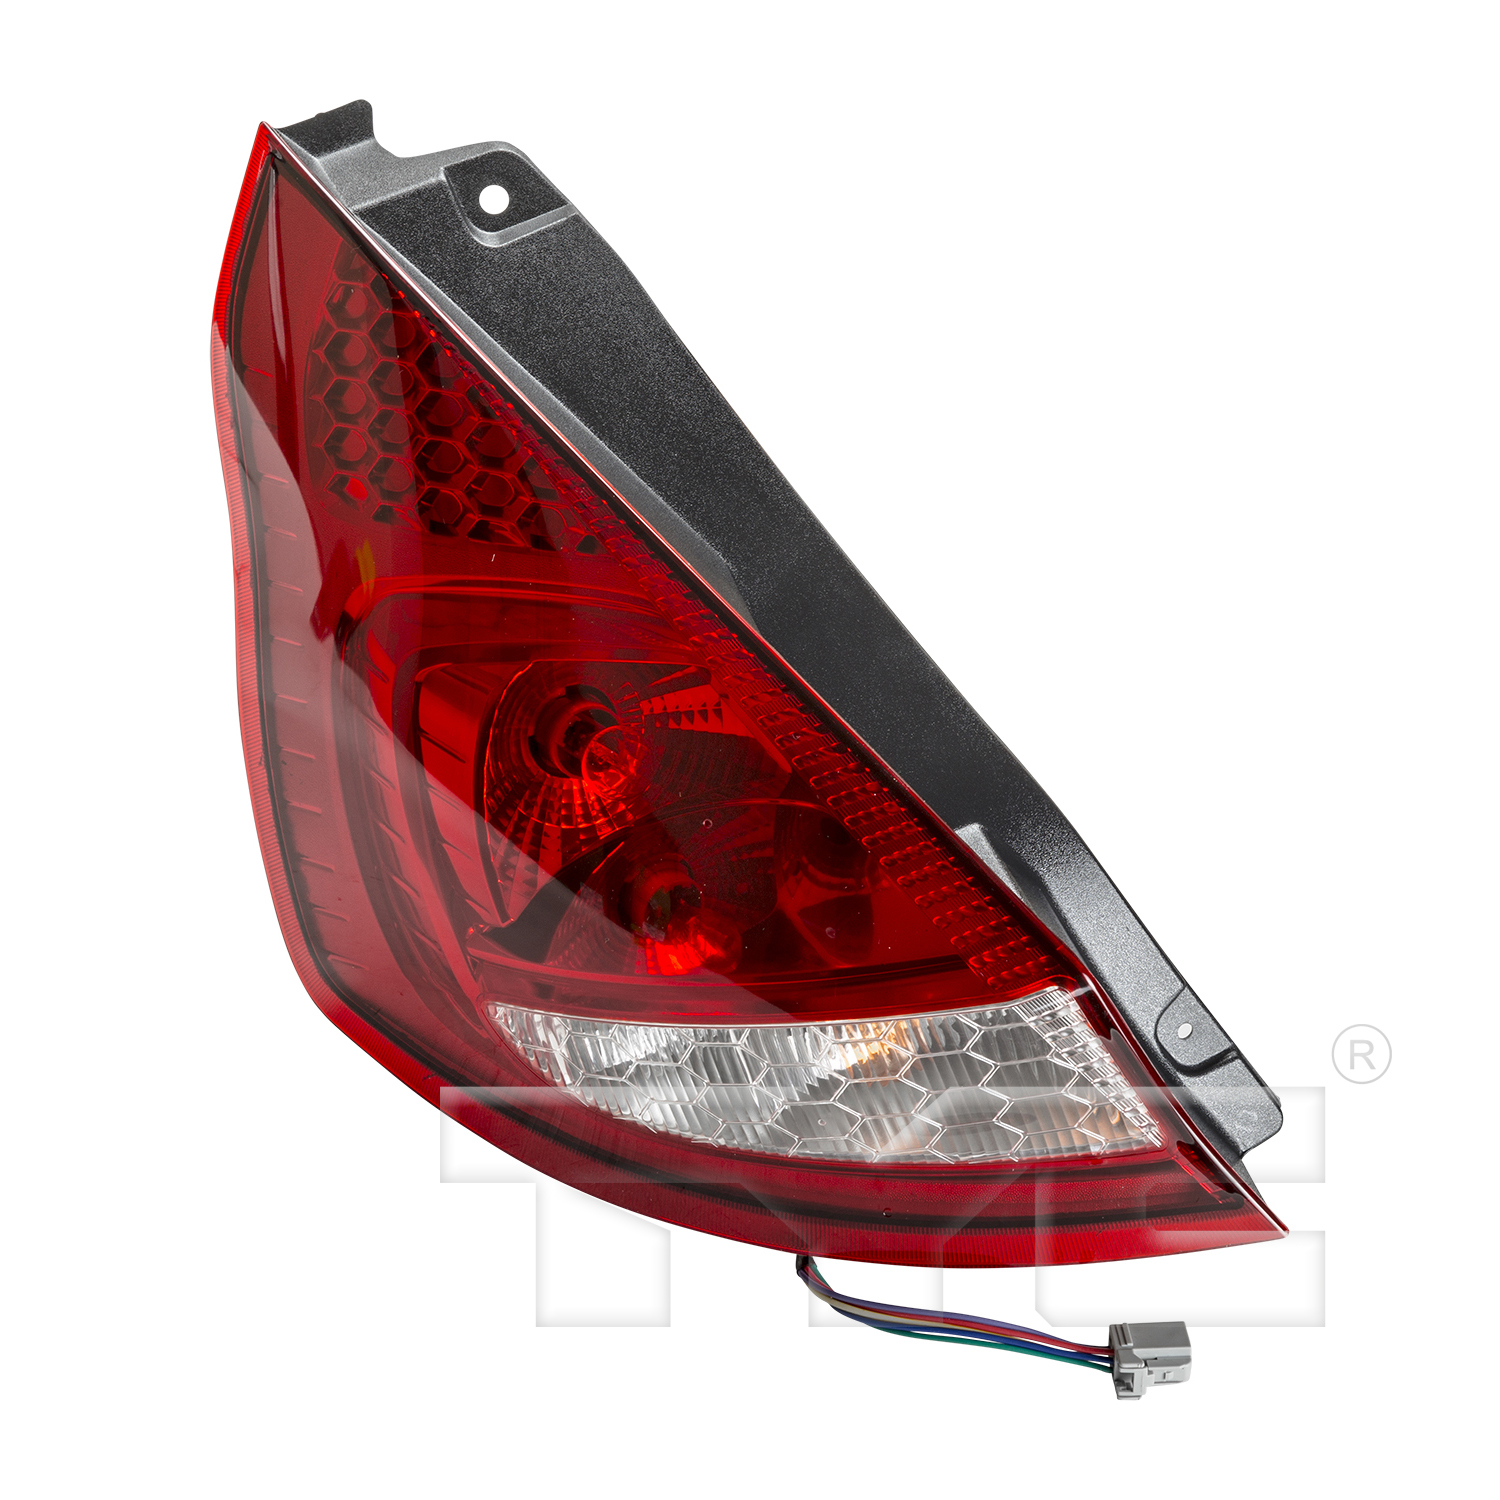 Aftermarket TAILLIGHTS for FORD - FIESTA, FIESTA,11-13,LT Taillamp assy